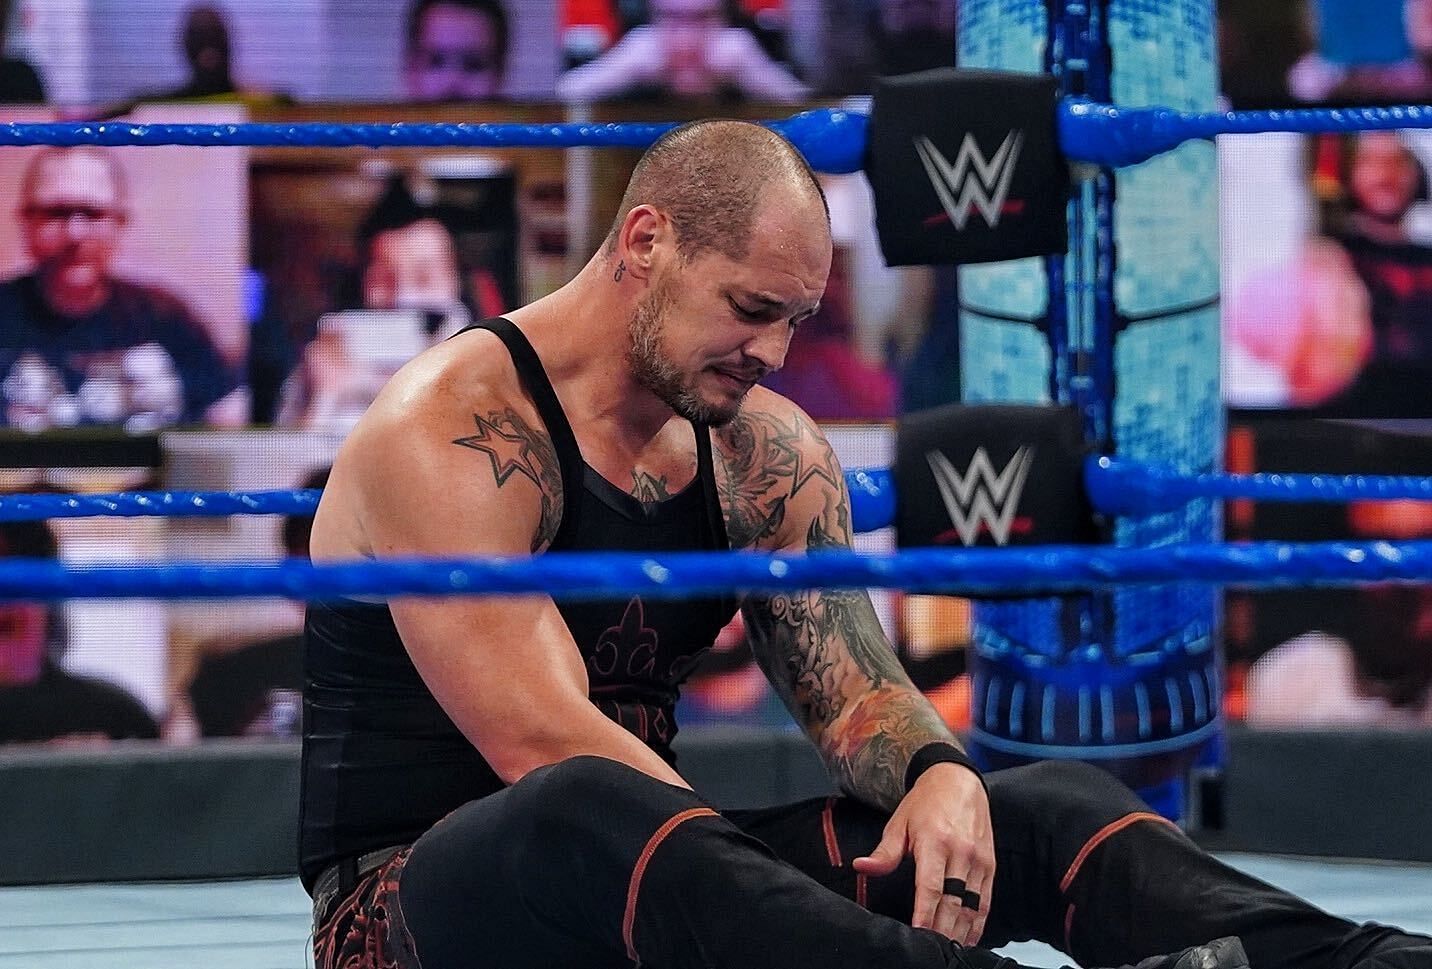 Baron Corbin took an embarassing loss from an upcoming WWE star.